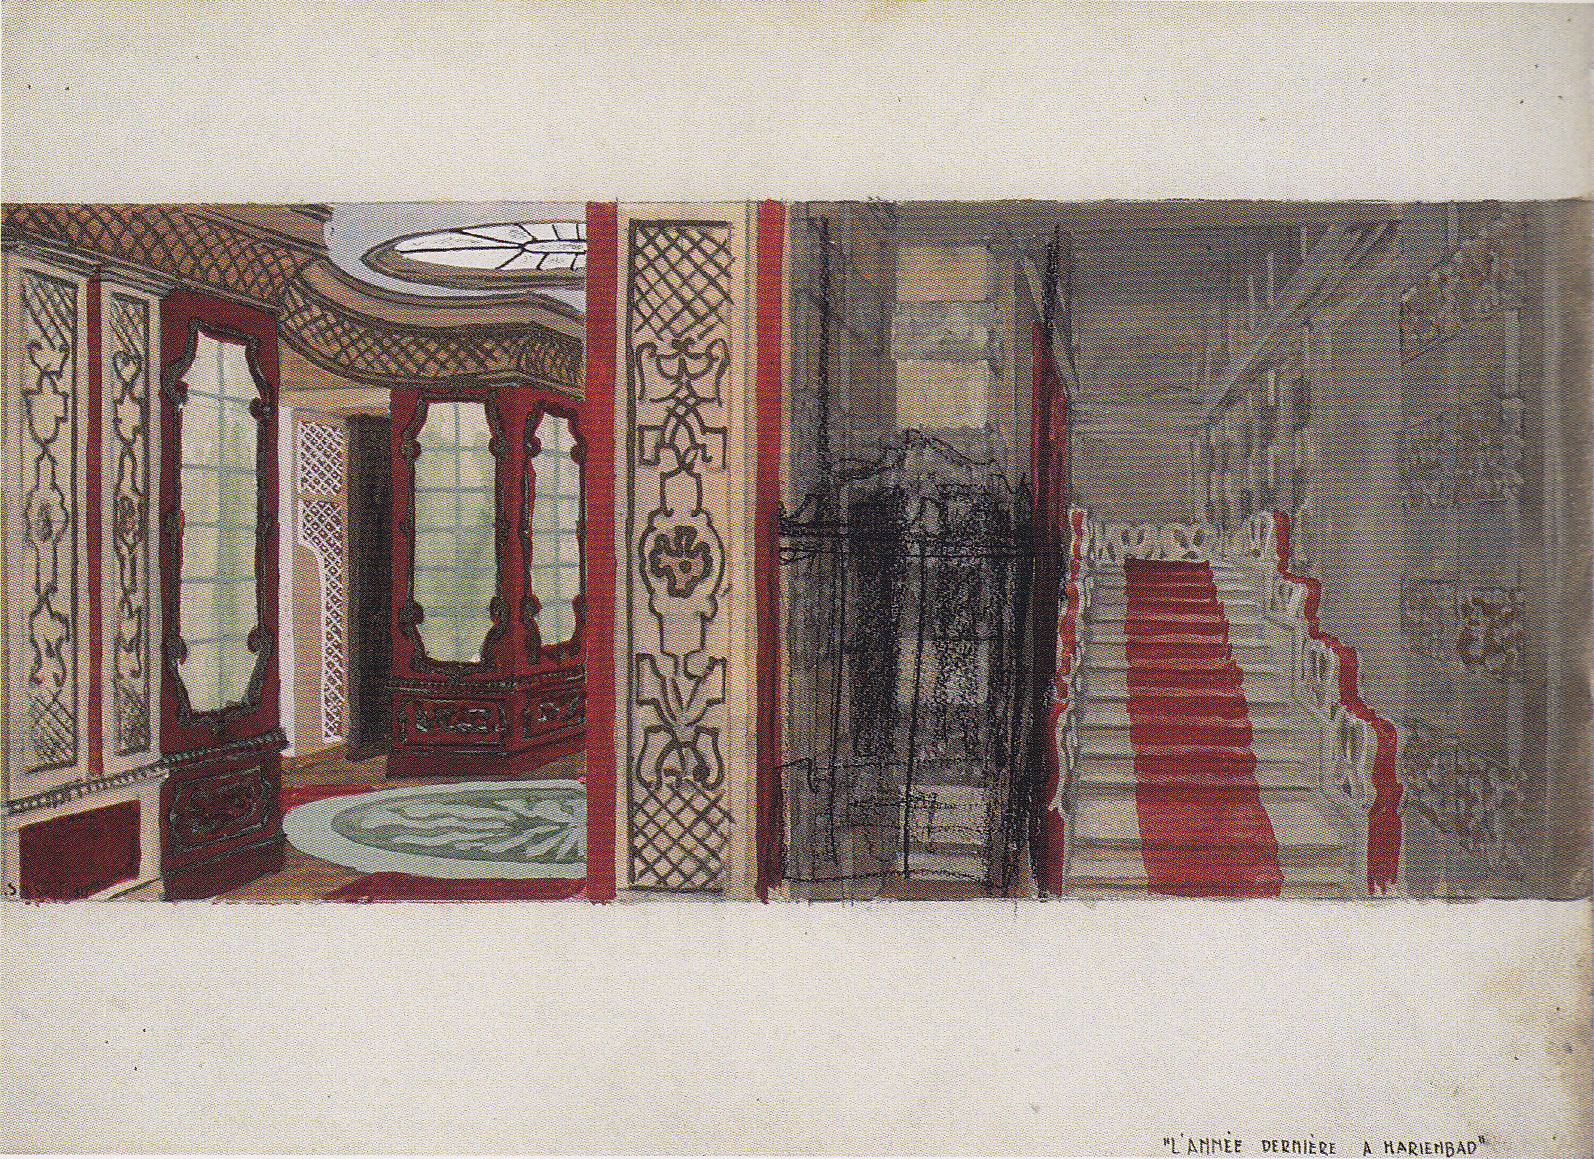 Jacques Saulnier, Design for the decor for Last Year at Marienbad, gouache on cardboard, 1960.